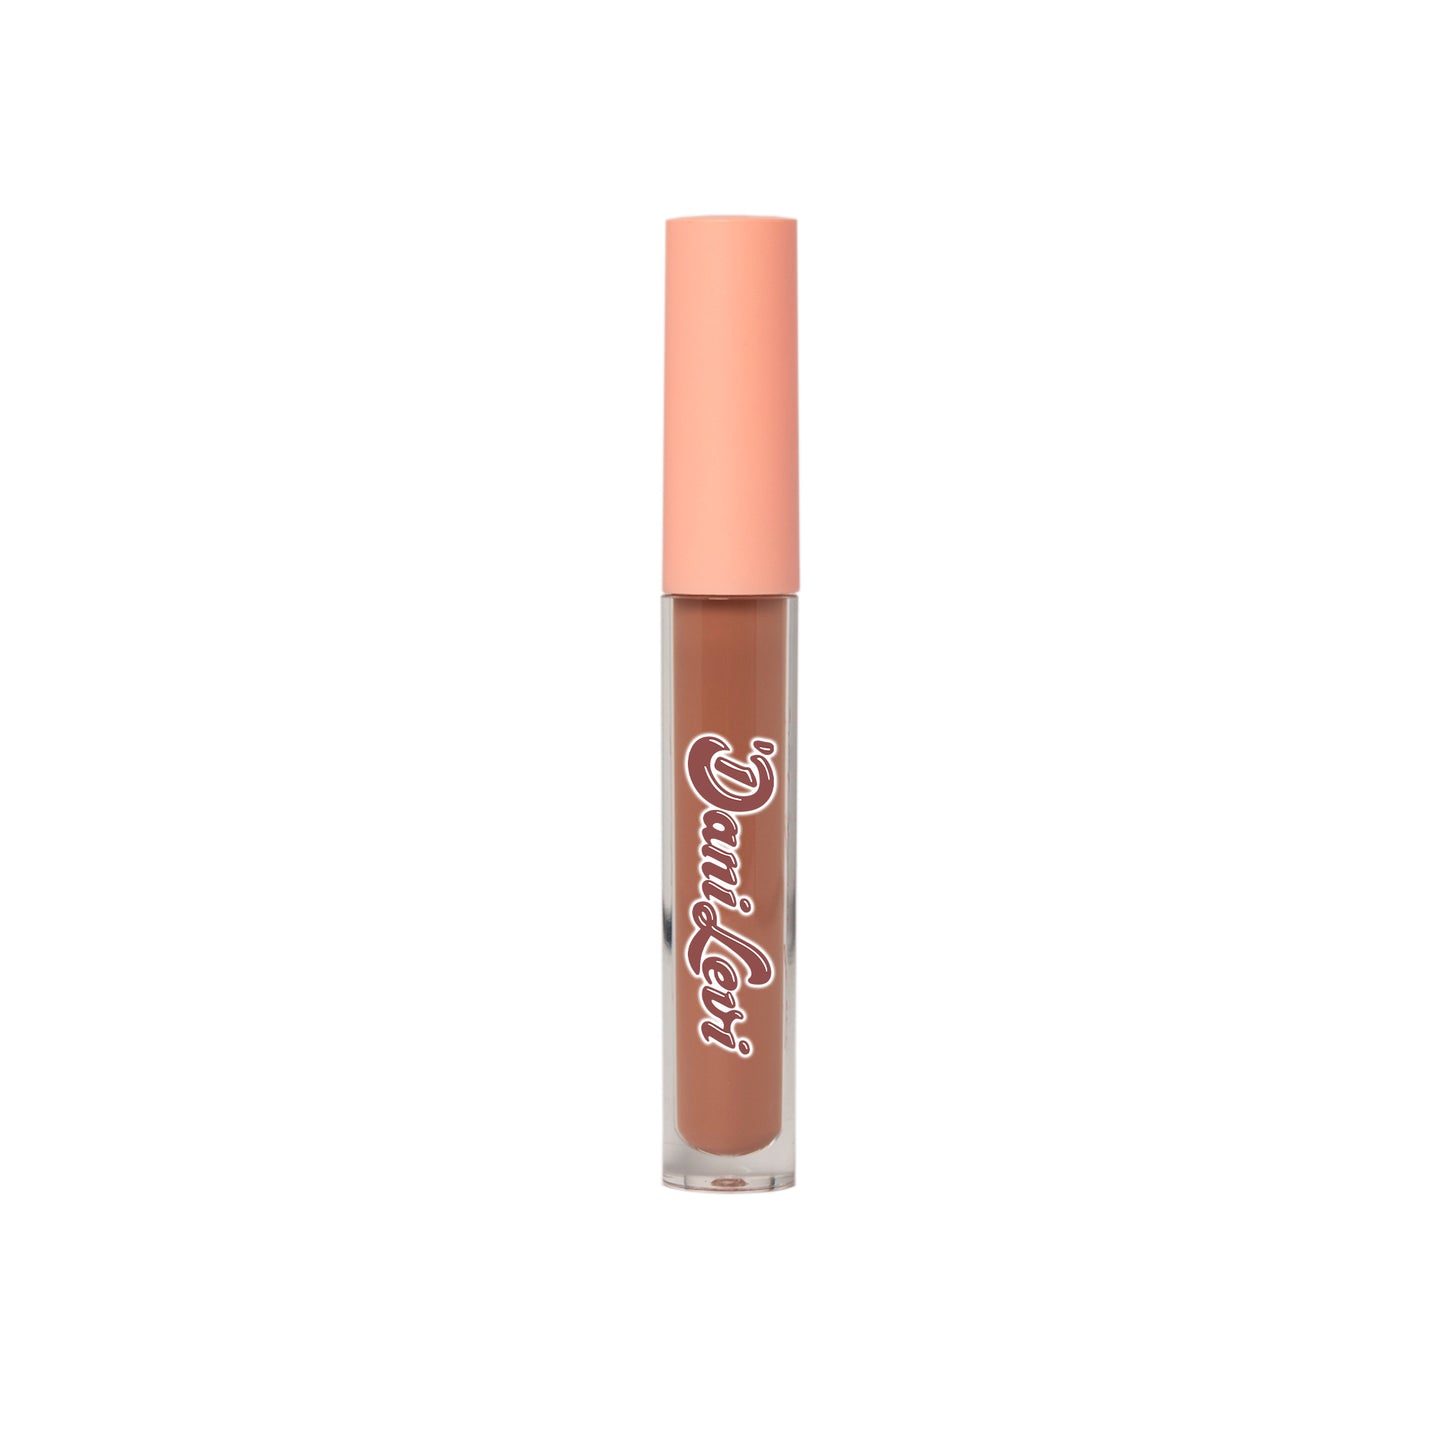 In The Nude Lipgloss